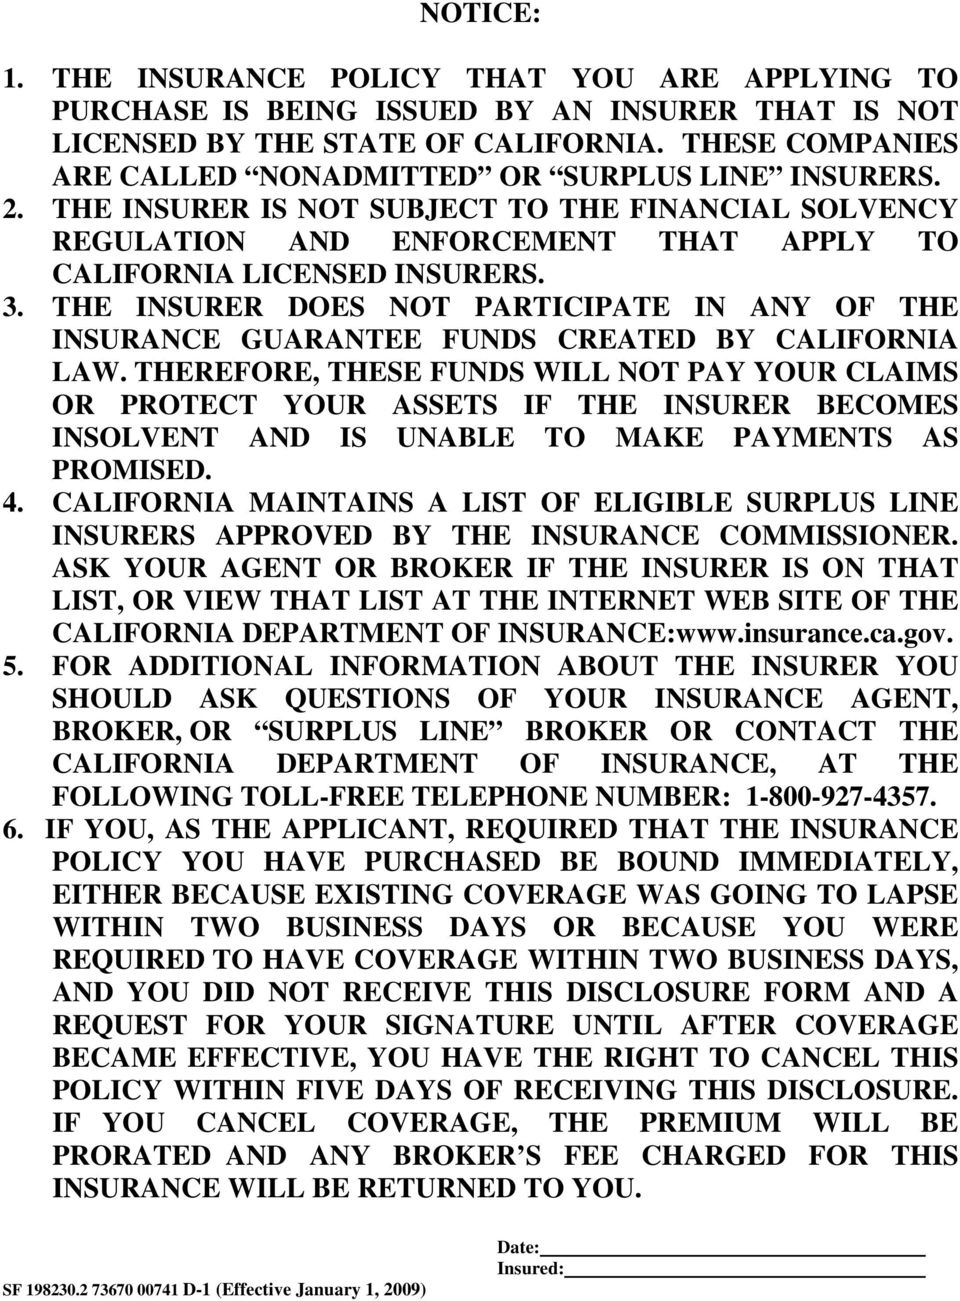 THE INSURER DOES NOT PARTICIPATE IN ANY OF THE INSURANCE GUARANTEE FUNDS CREATED BY CALIFORNIA LAW.